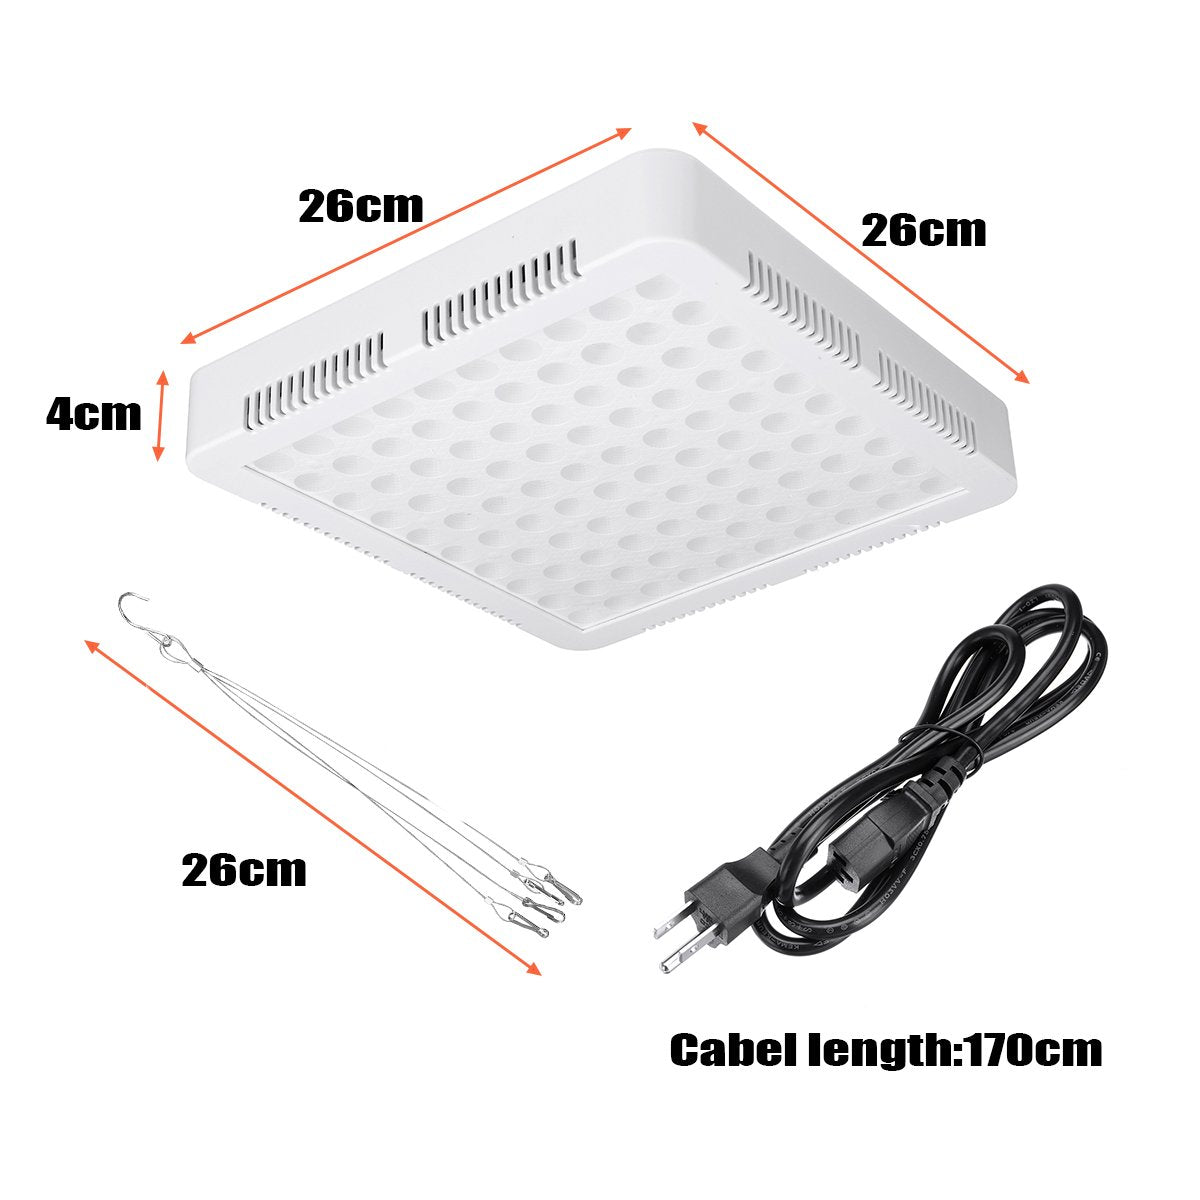 Full Spectrum LED Grow Light Growing Lamp Built in 2 fans For Hydroponic Plant